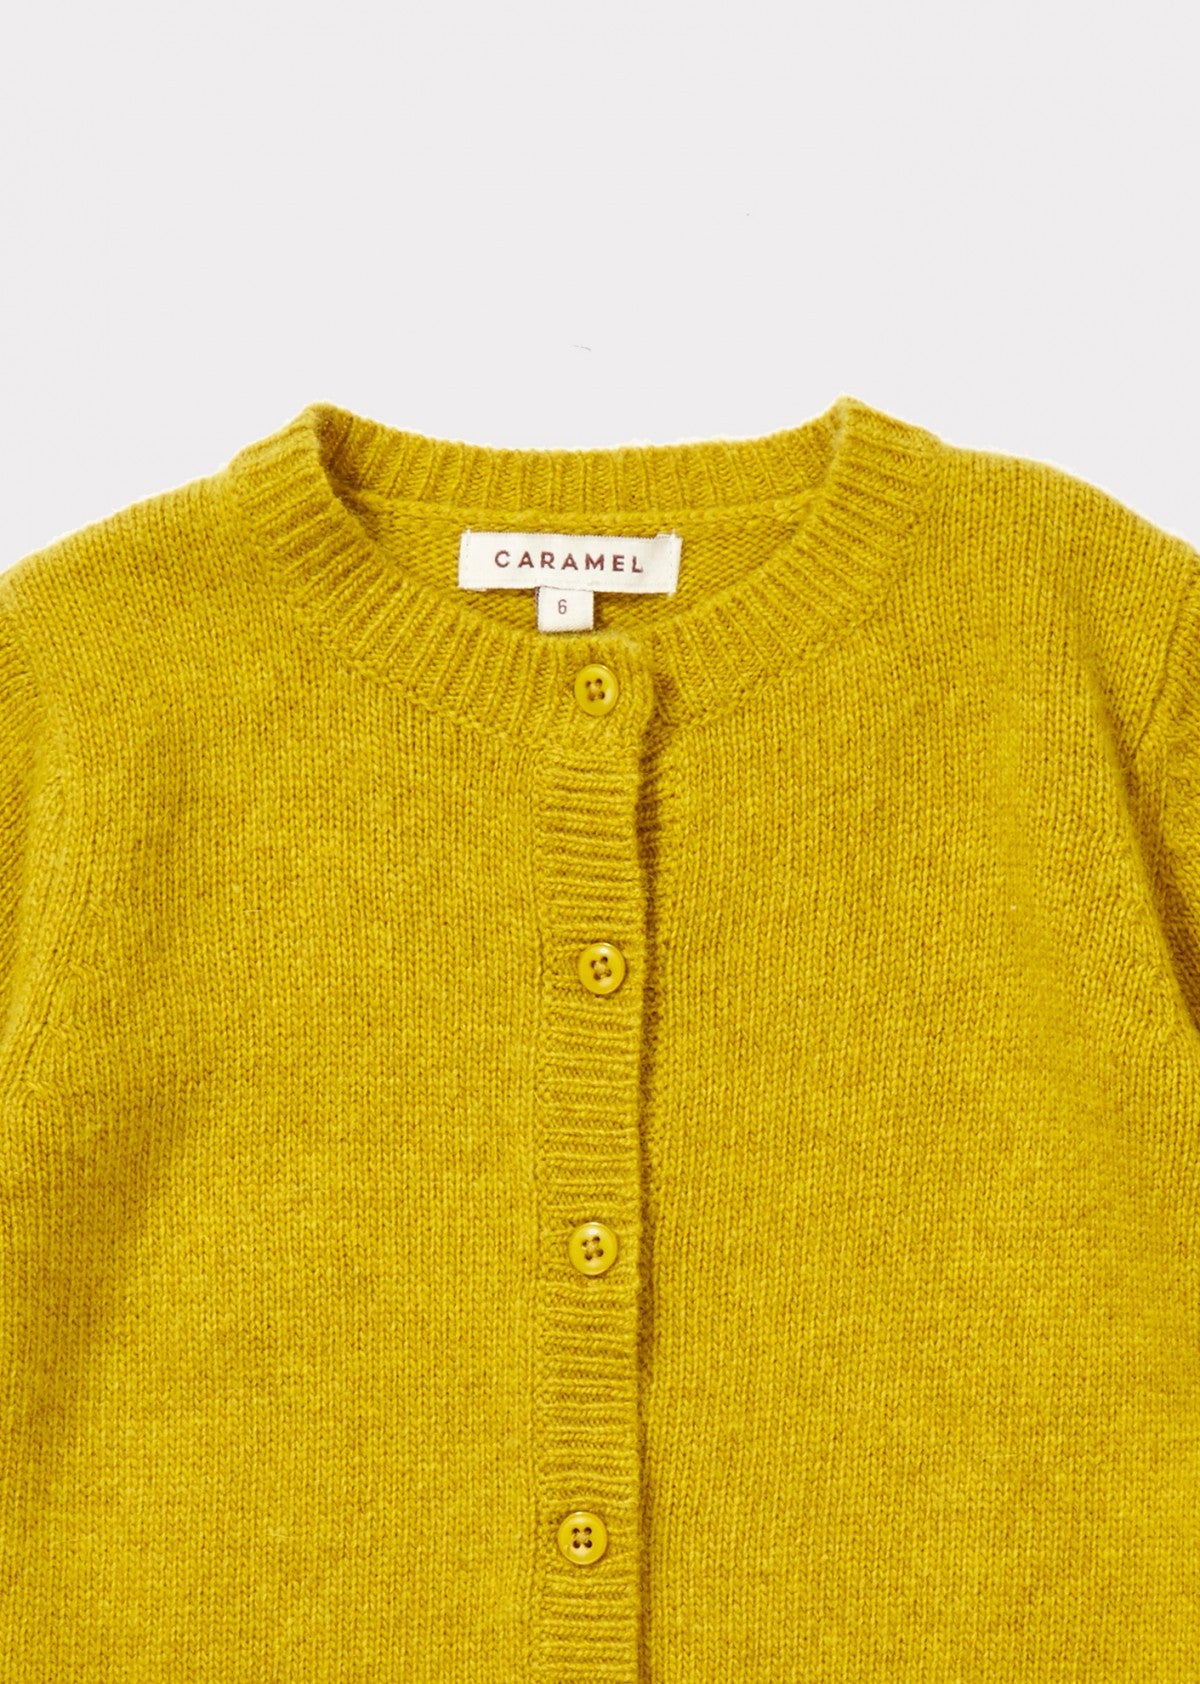 Baby Yellow Knitted Cardigan